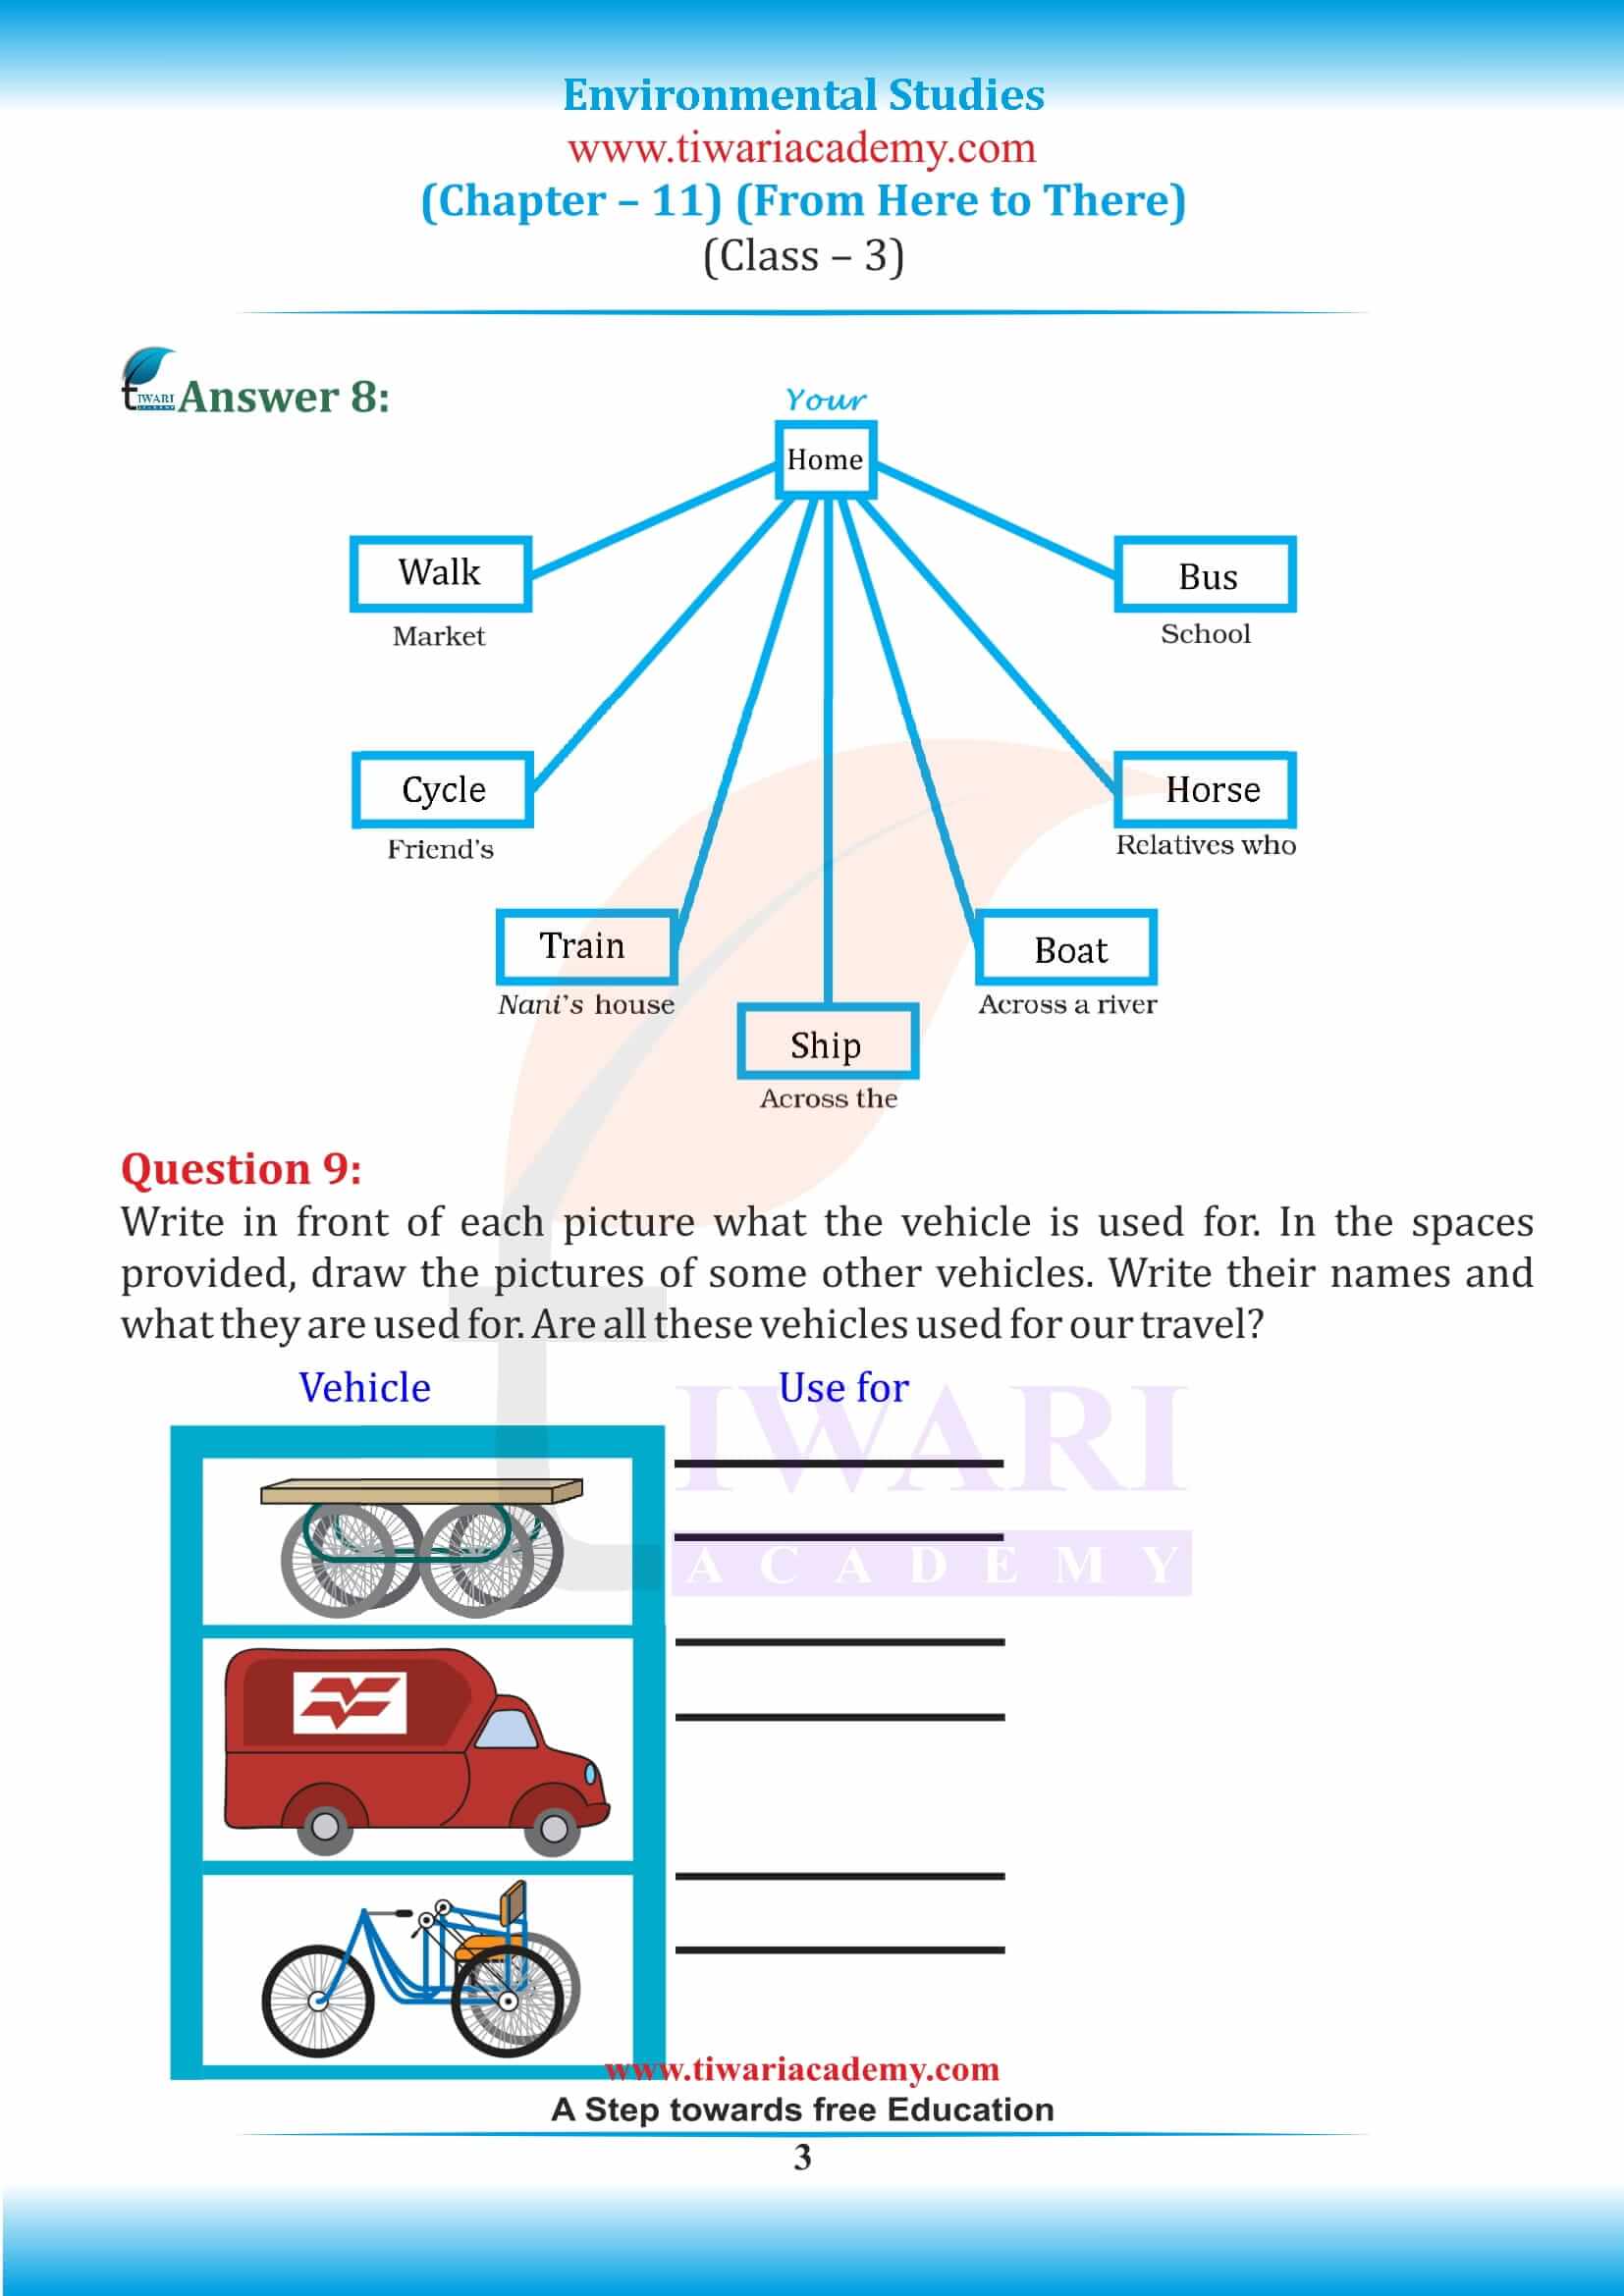 NCERT Solutions for Class 3 EVS Chapter 11 in PDF